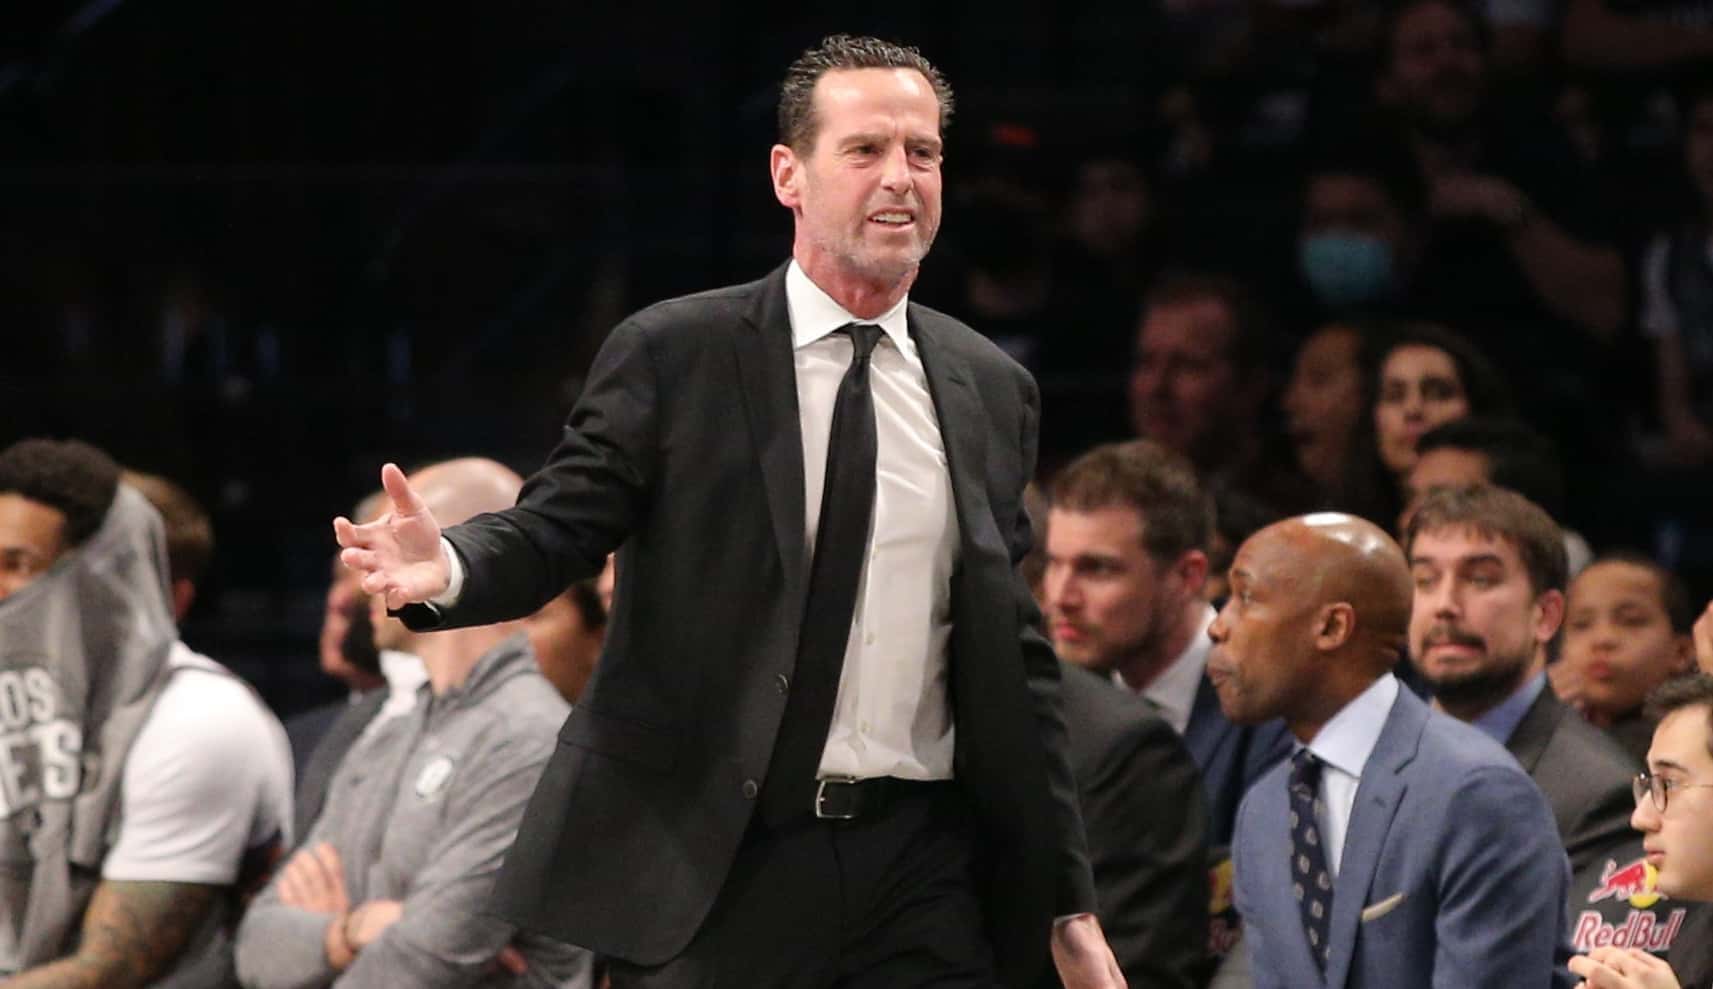 Mar 6, 2020; Brooklyn, New York, USA; Brooklyn Nets head coach Kenny Atkinson reacts during the second quarter against the San Antonio Spurs at Barclays Center. Mandatory Credit: Brad Penner-USA TODAY Sports